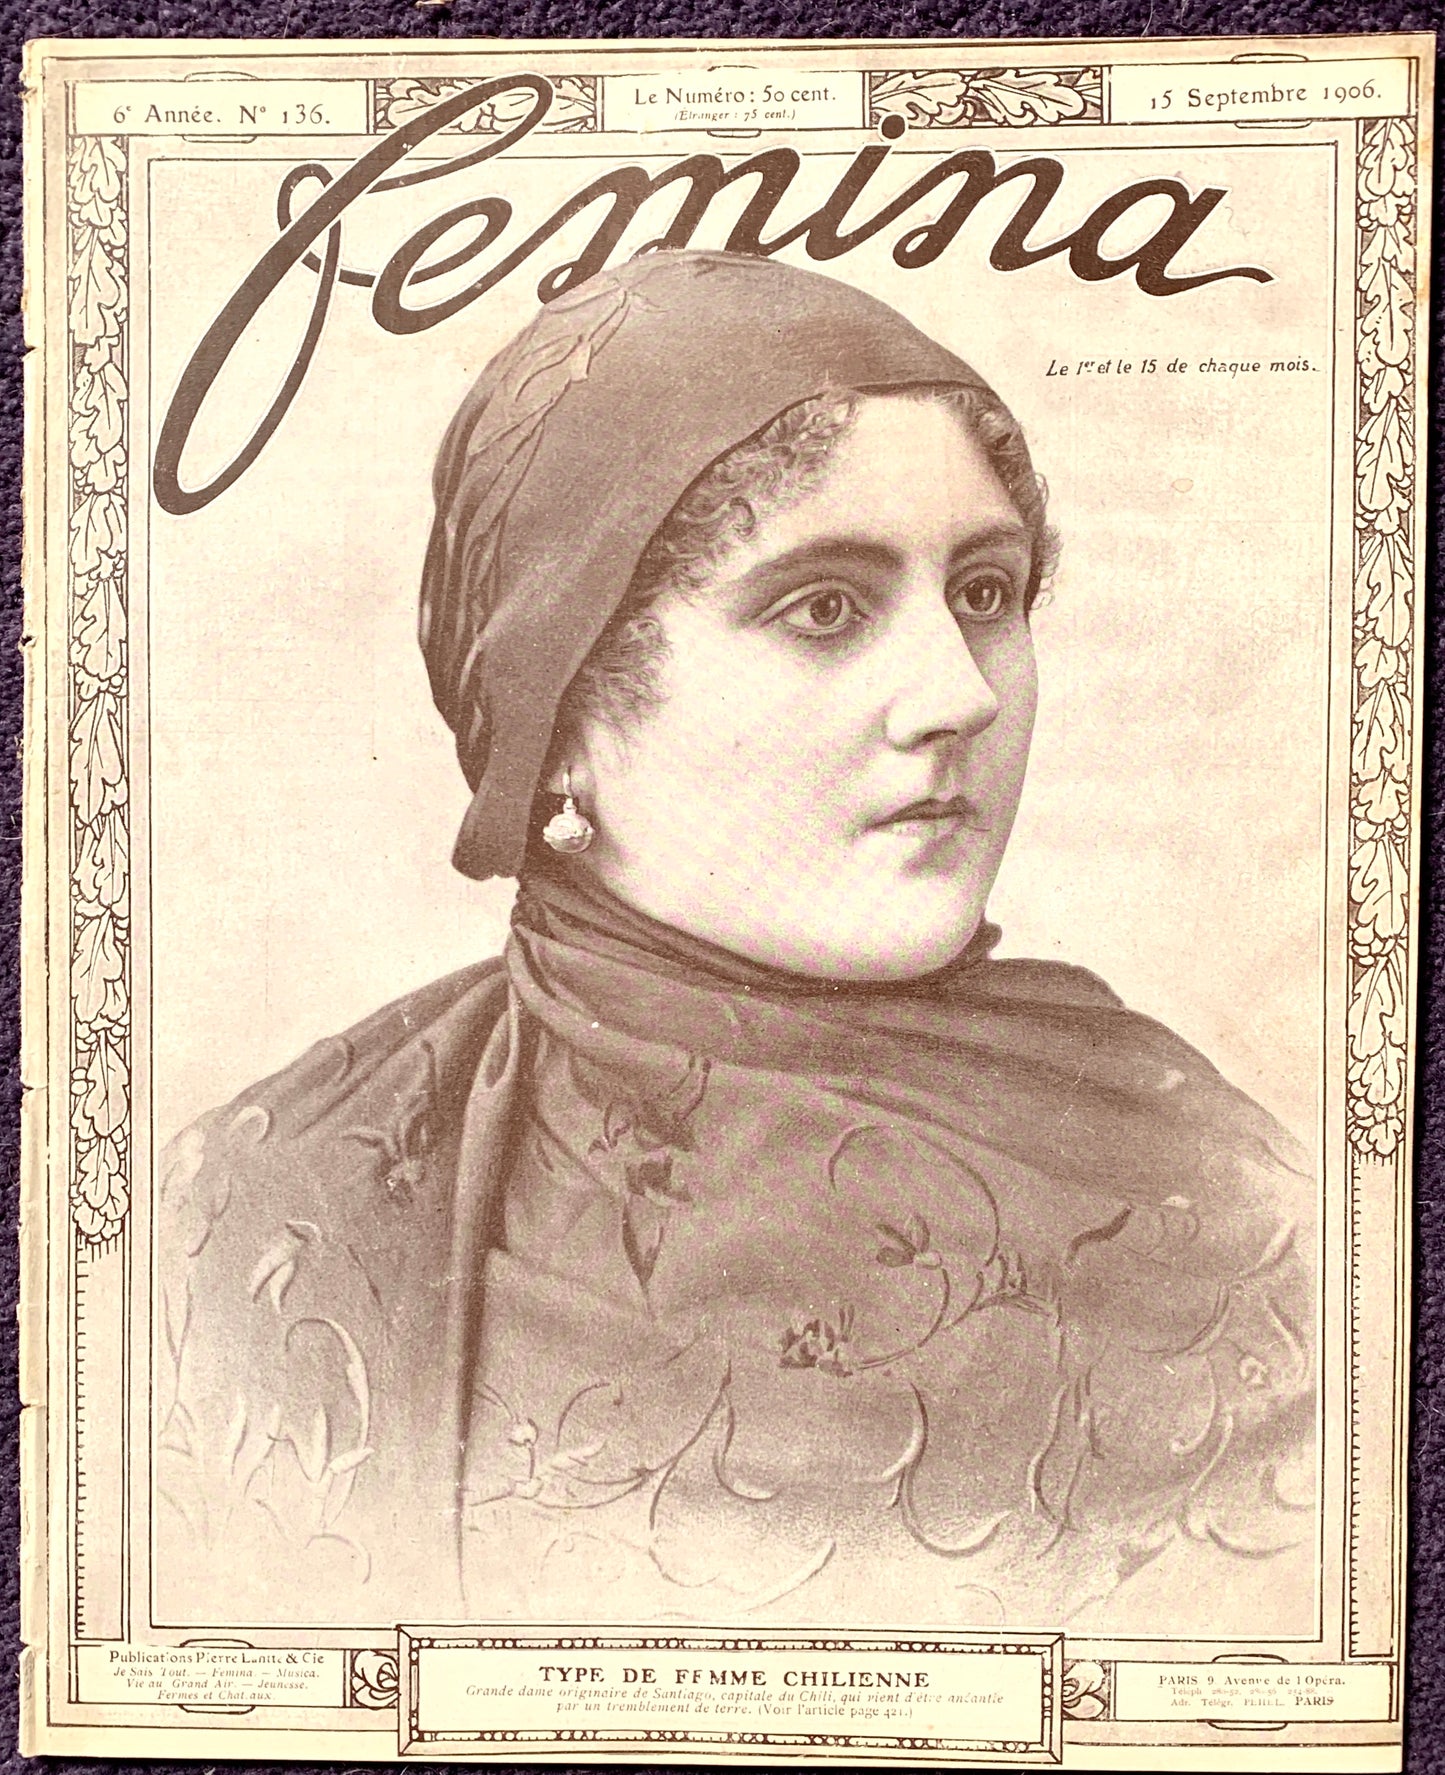 September 1906 French Magazine FEMINA Lots of Gorgeous Illustrations and Adverts including 3 Full Page Colour Portraits.